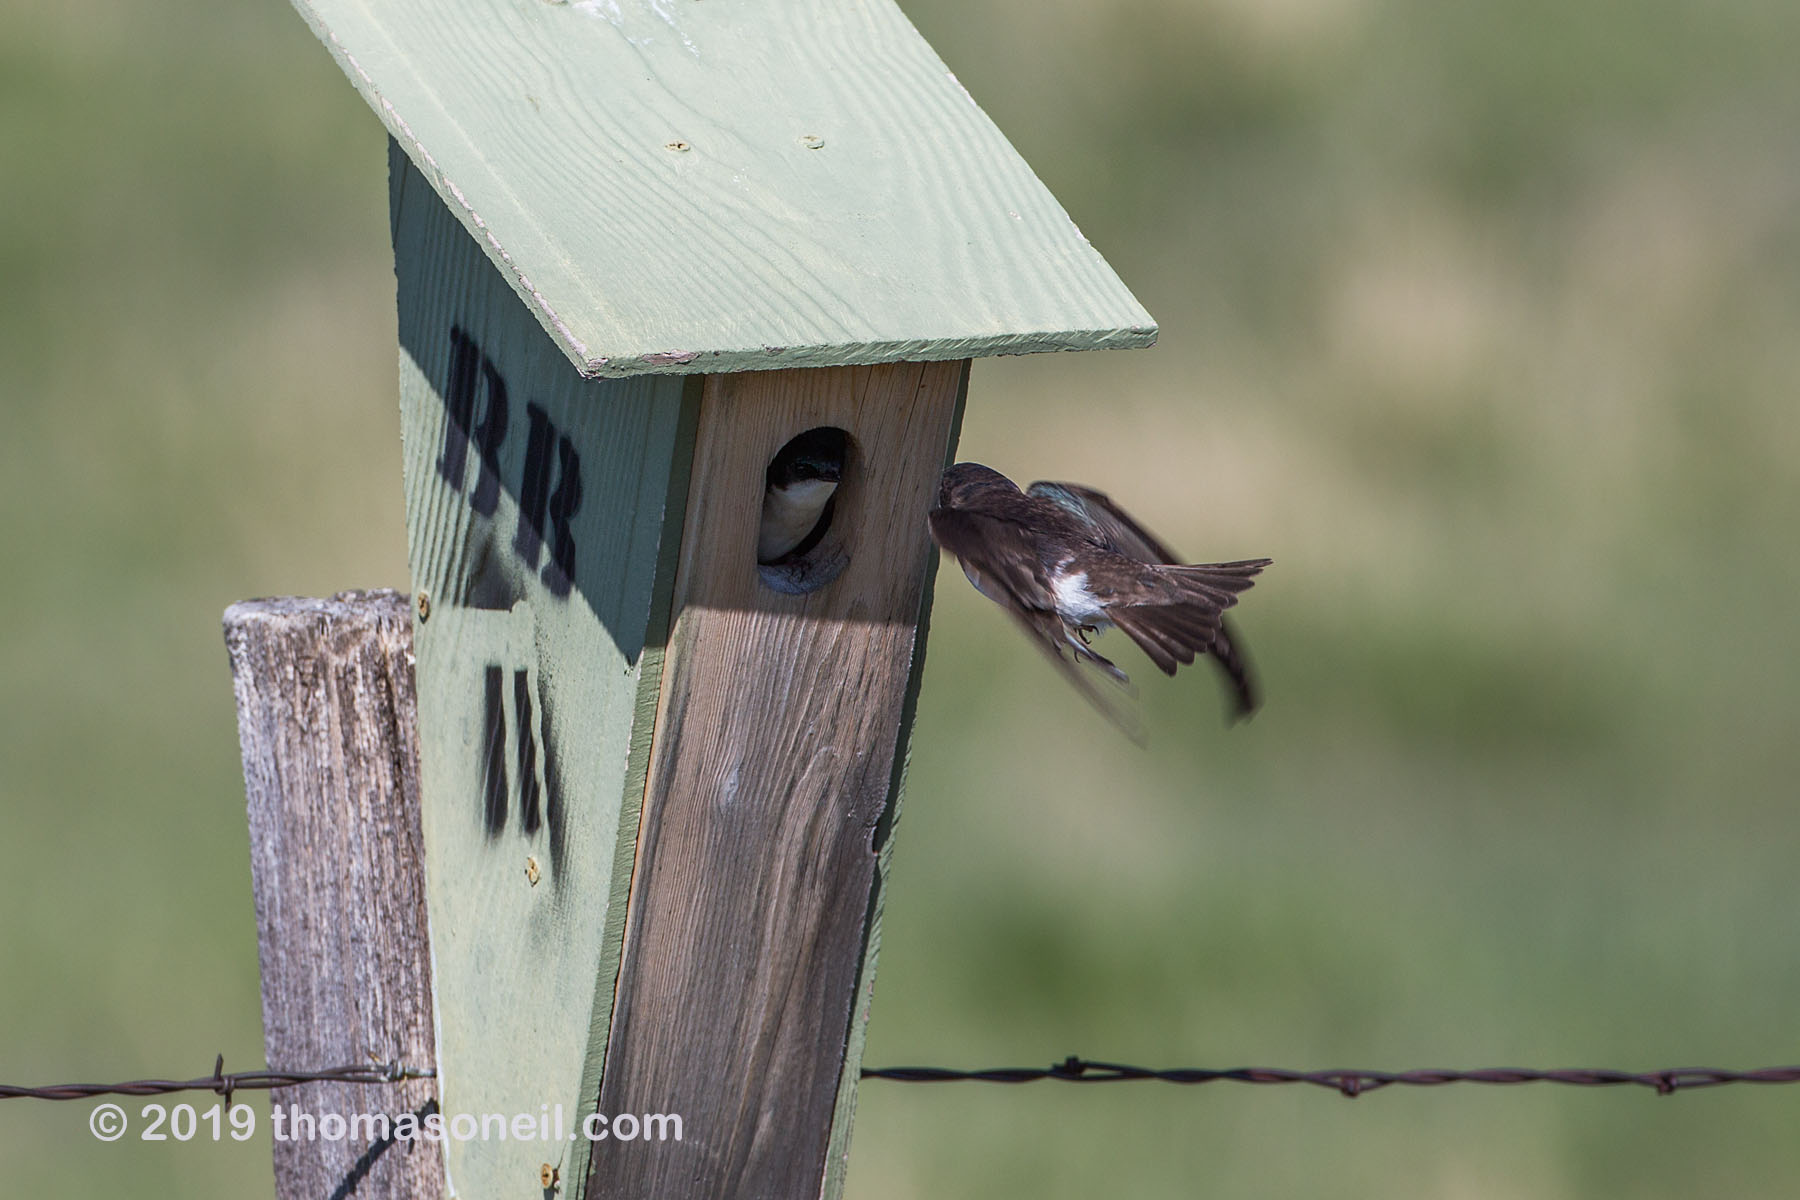 Swallow trying to feed the chick inside the nest box, Custer State Park, May 2019.  Click for next photo.